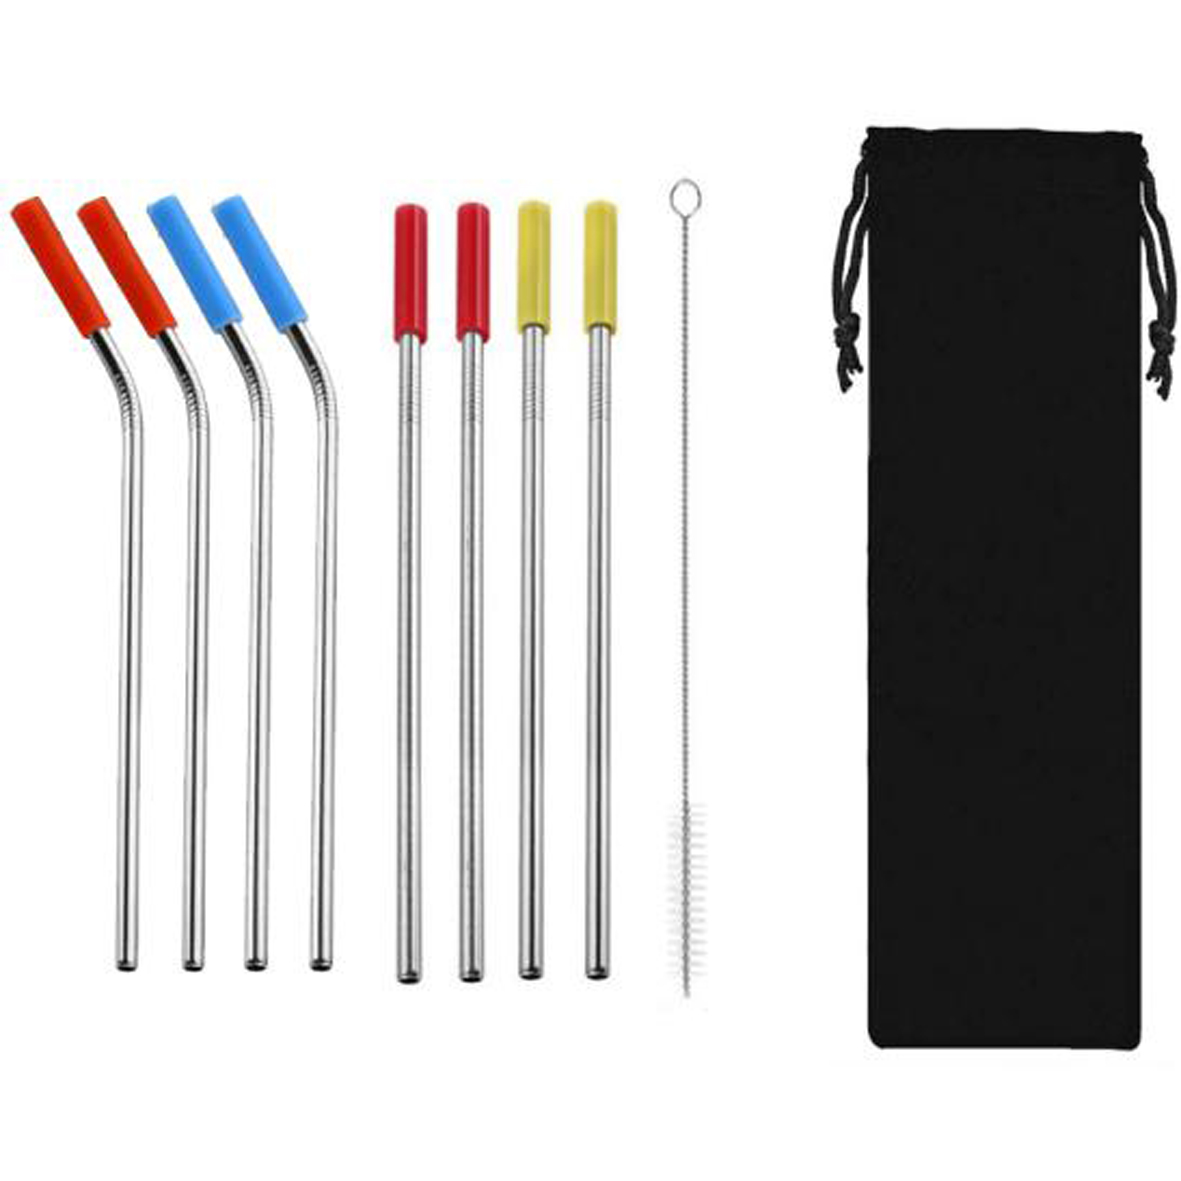 GL-ELY1258 9 in 1 Metal Straw Set with Rubber Tip